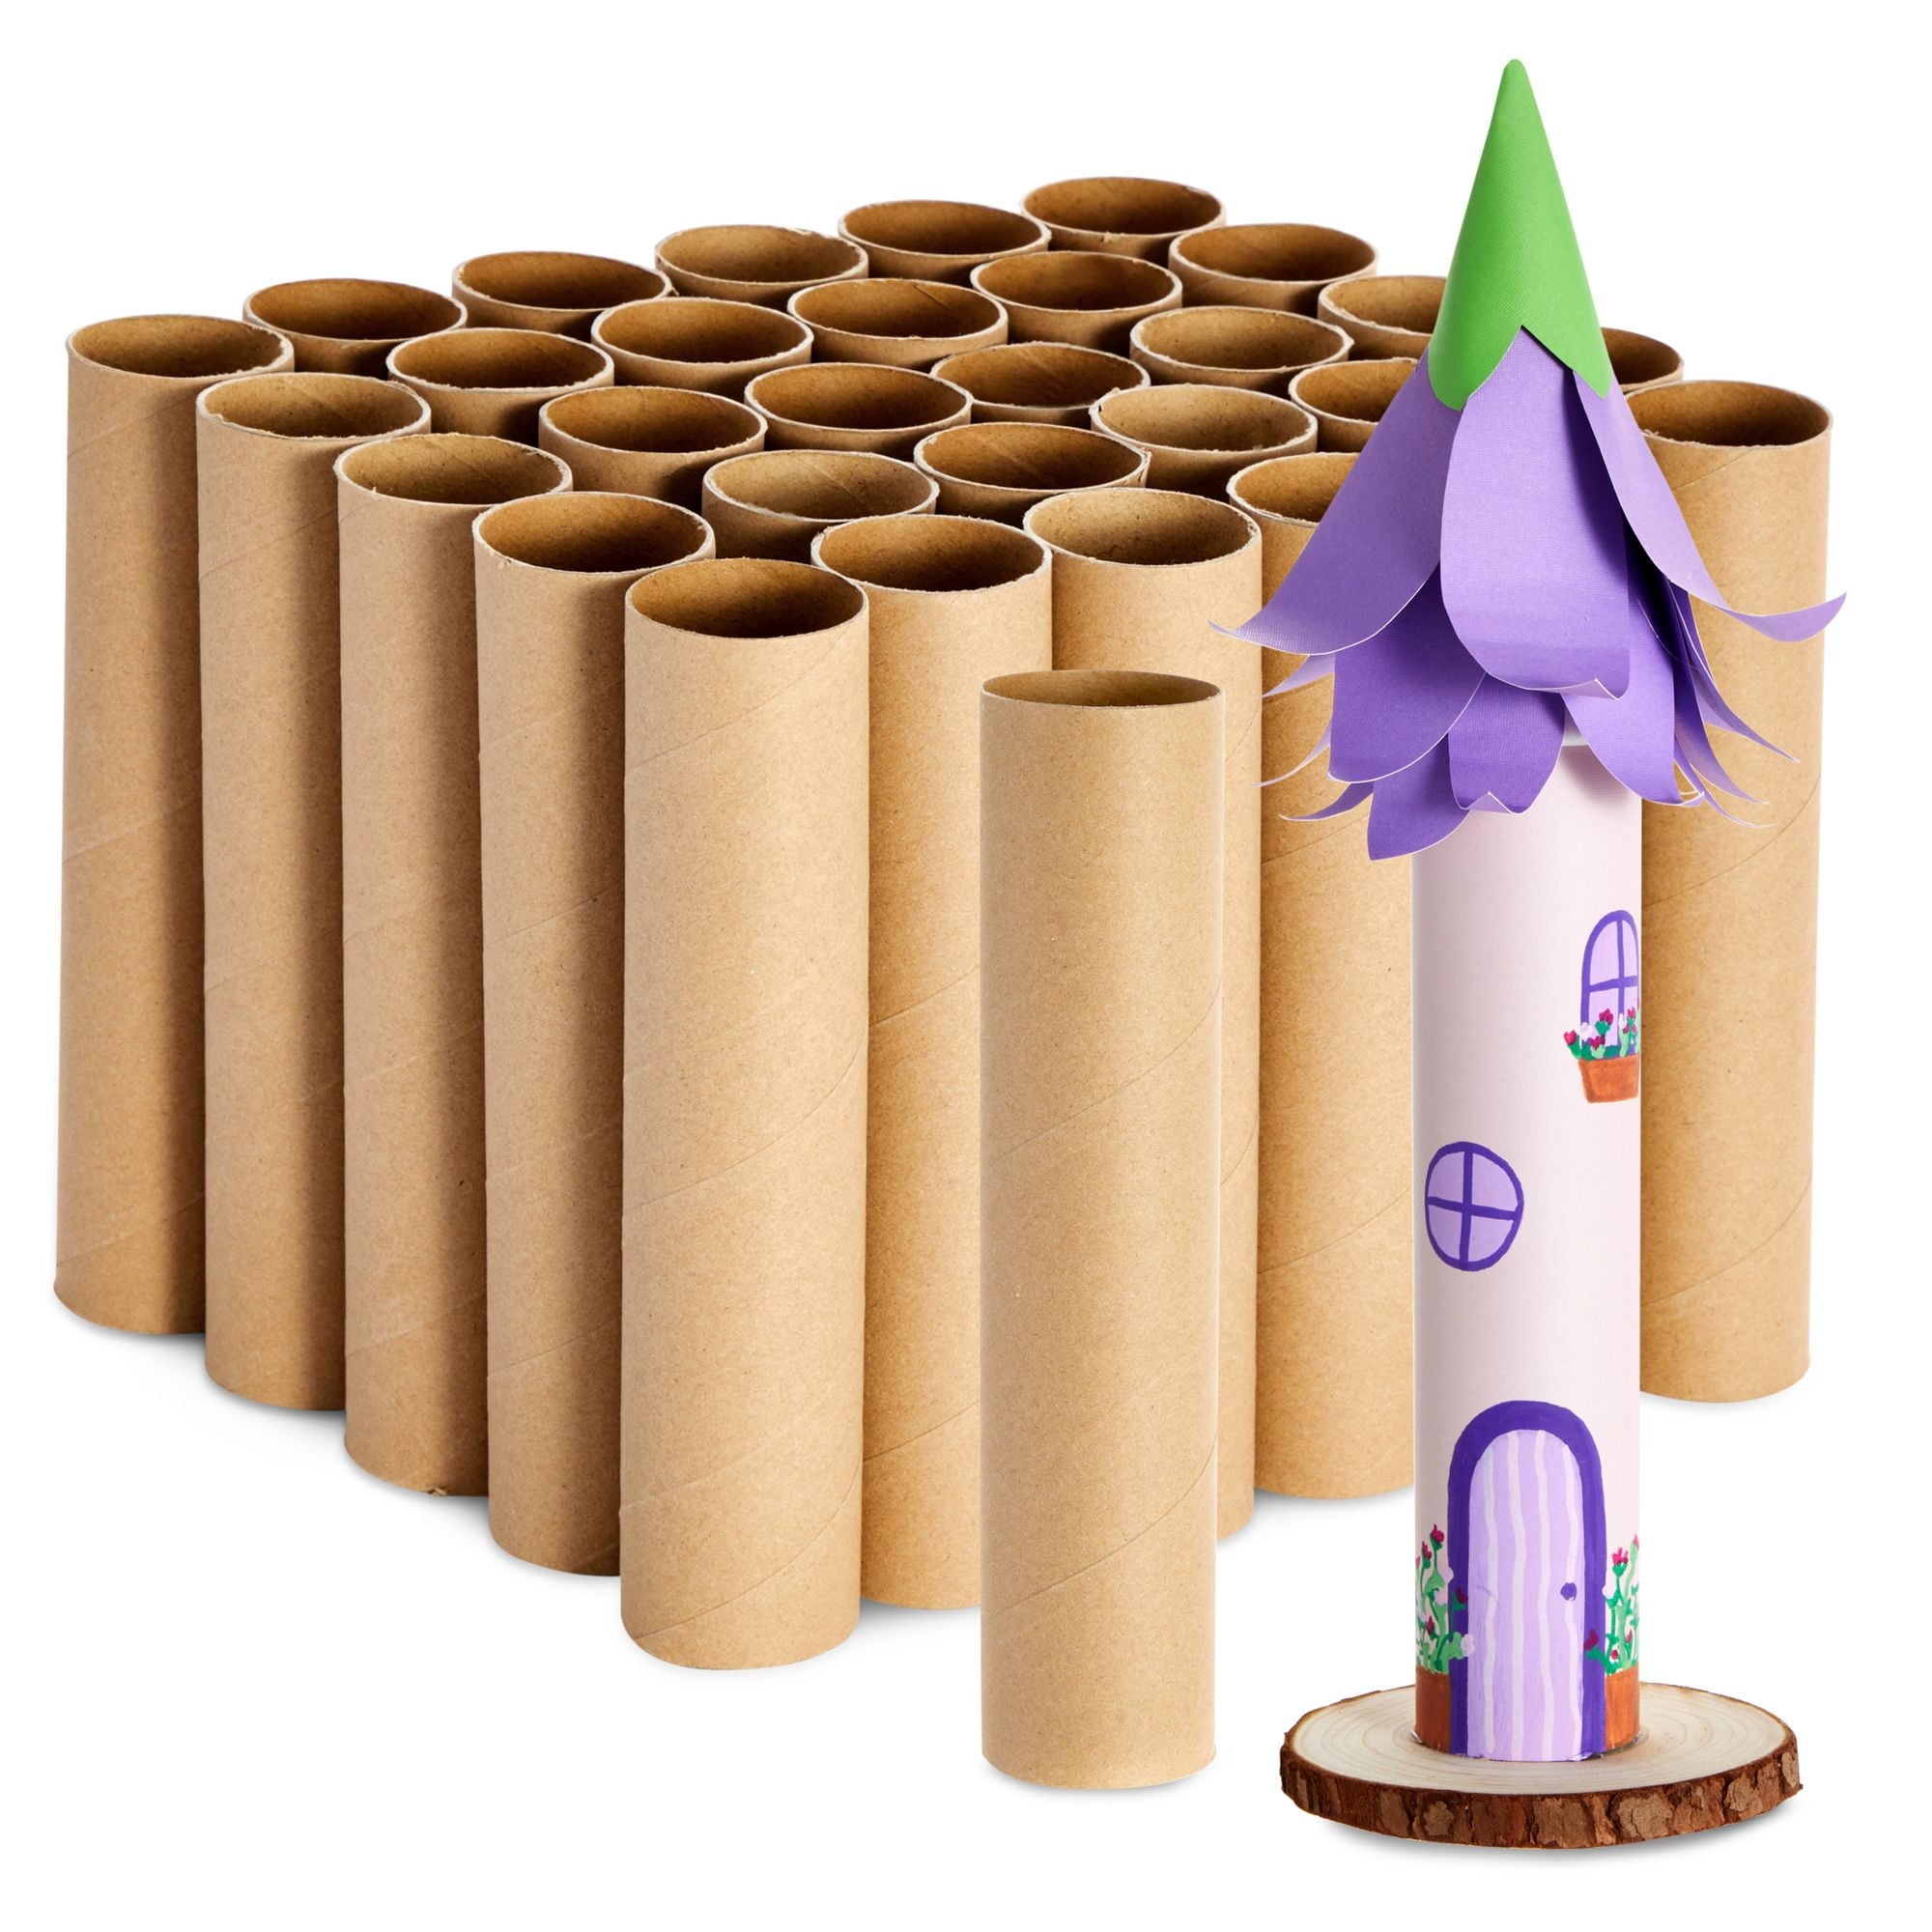 30 Pack 8 Inch Cardboard Tubes, 1.6x8“ Empty Toilet Paper Rolls For Crafts  and Art Projects, DIY Brown Crafting Paper Roll for Classrooms, Dioramas,  and Decorations 